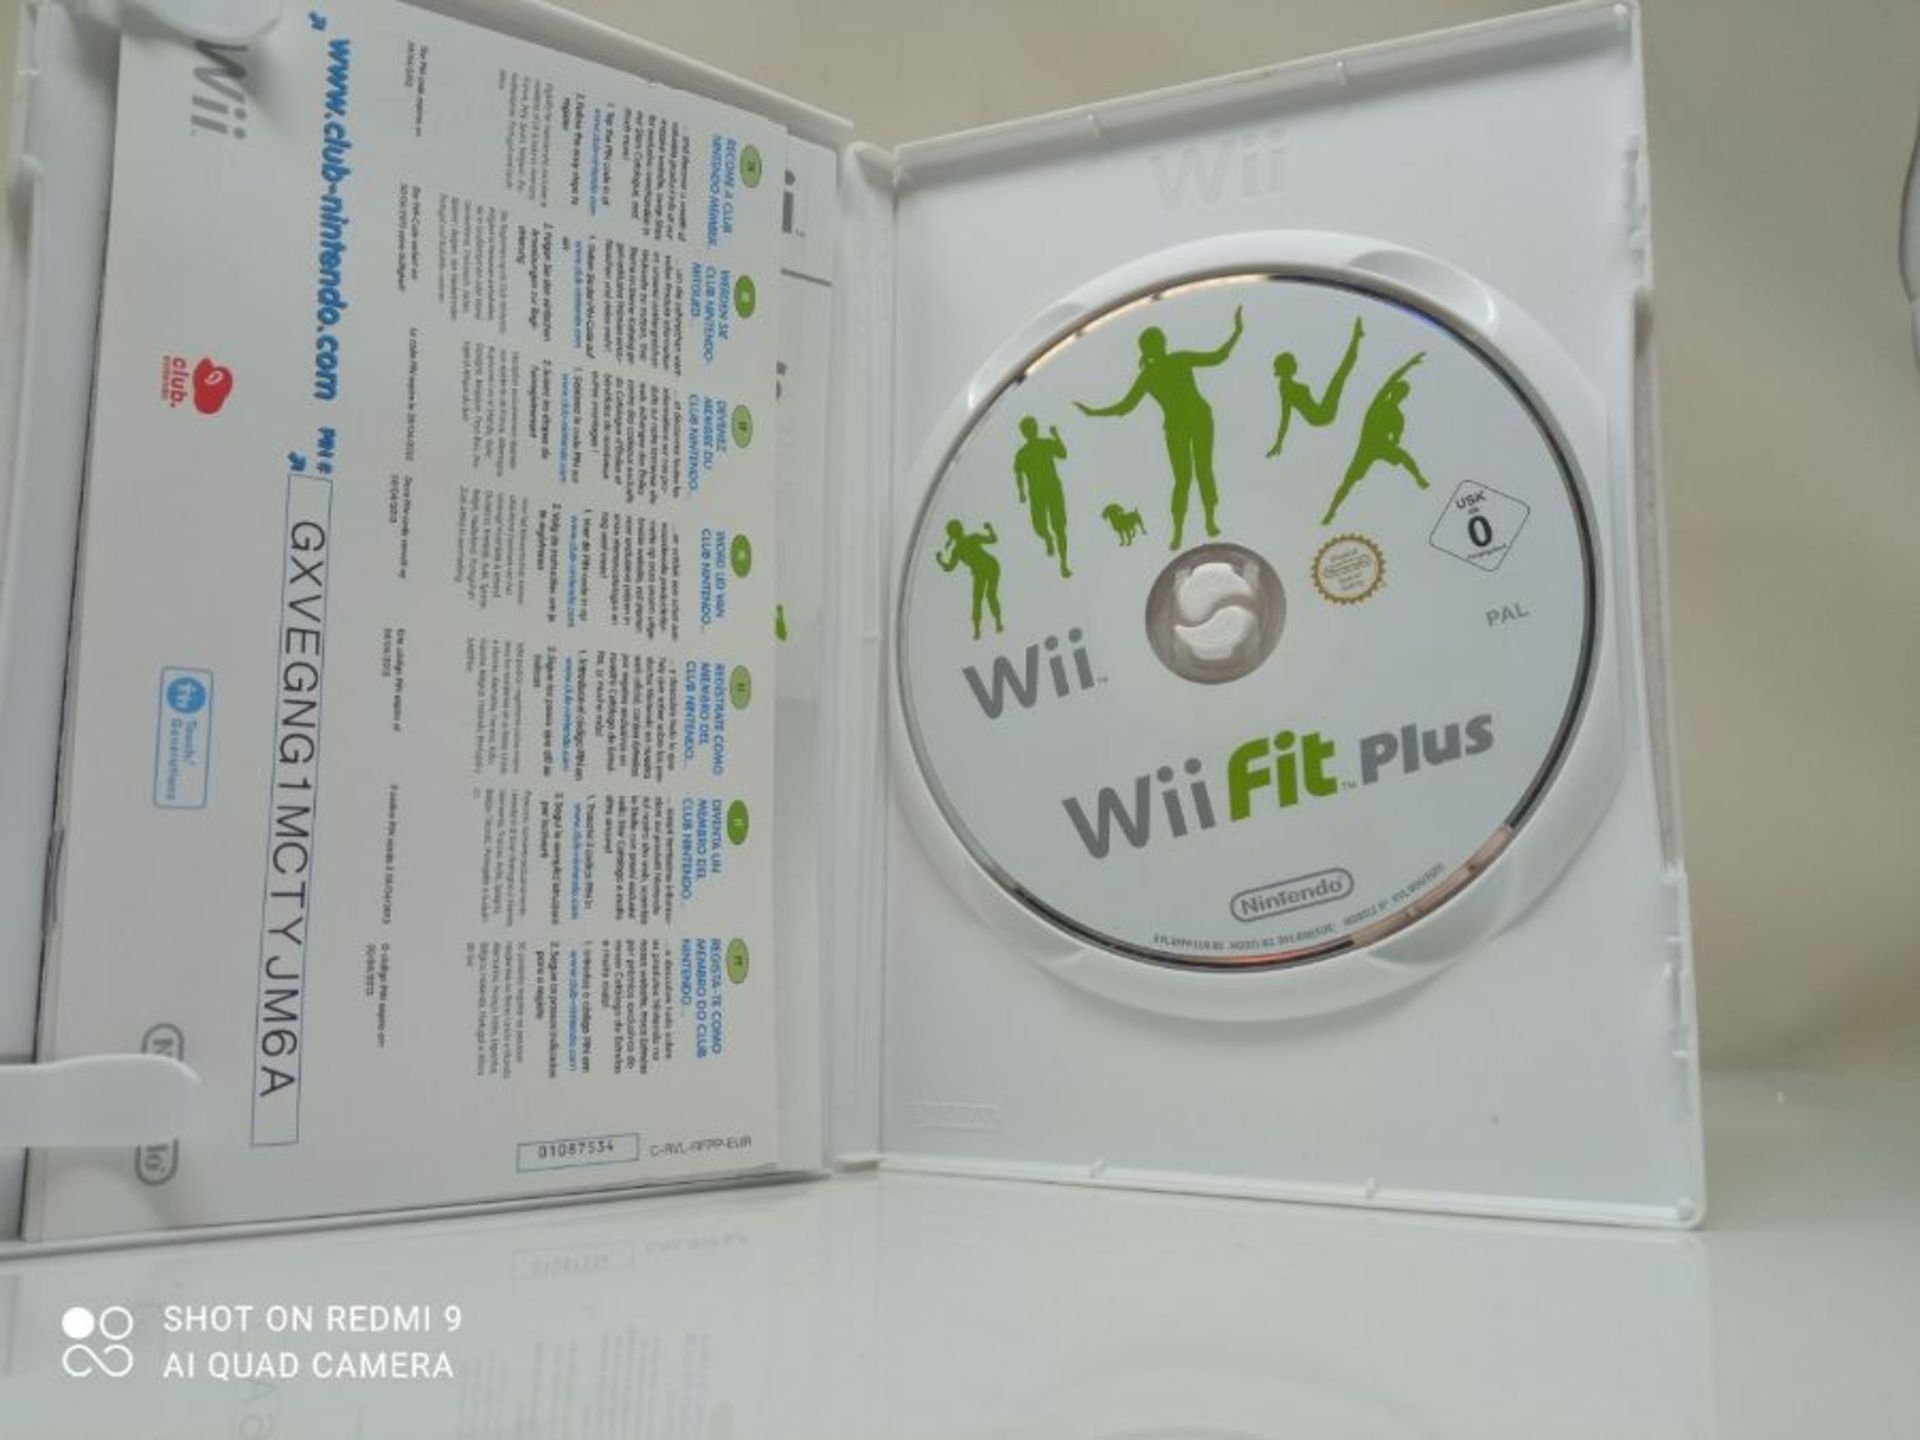 Wii Fit Plus game - Image 6 of 6